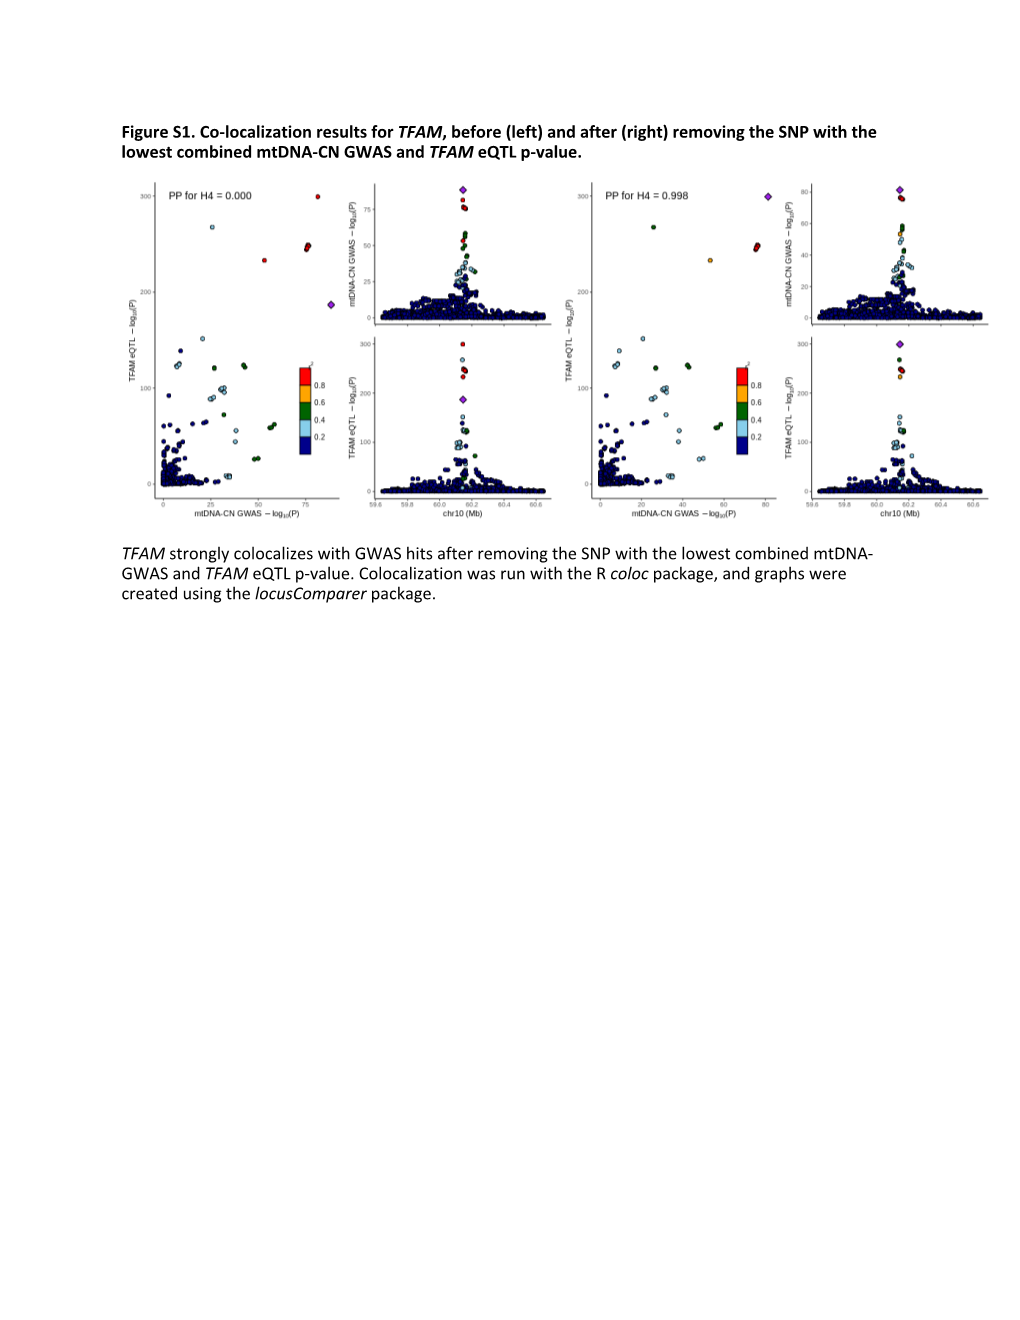 Removing the SNP with the Lowest Combined Mtdna-CN GWAS and TFAM Eqtl P-Value